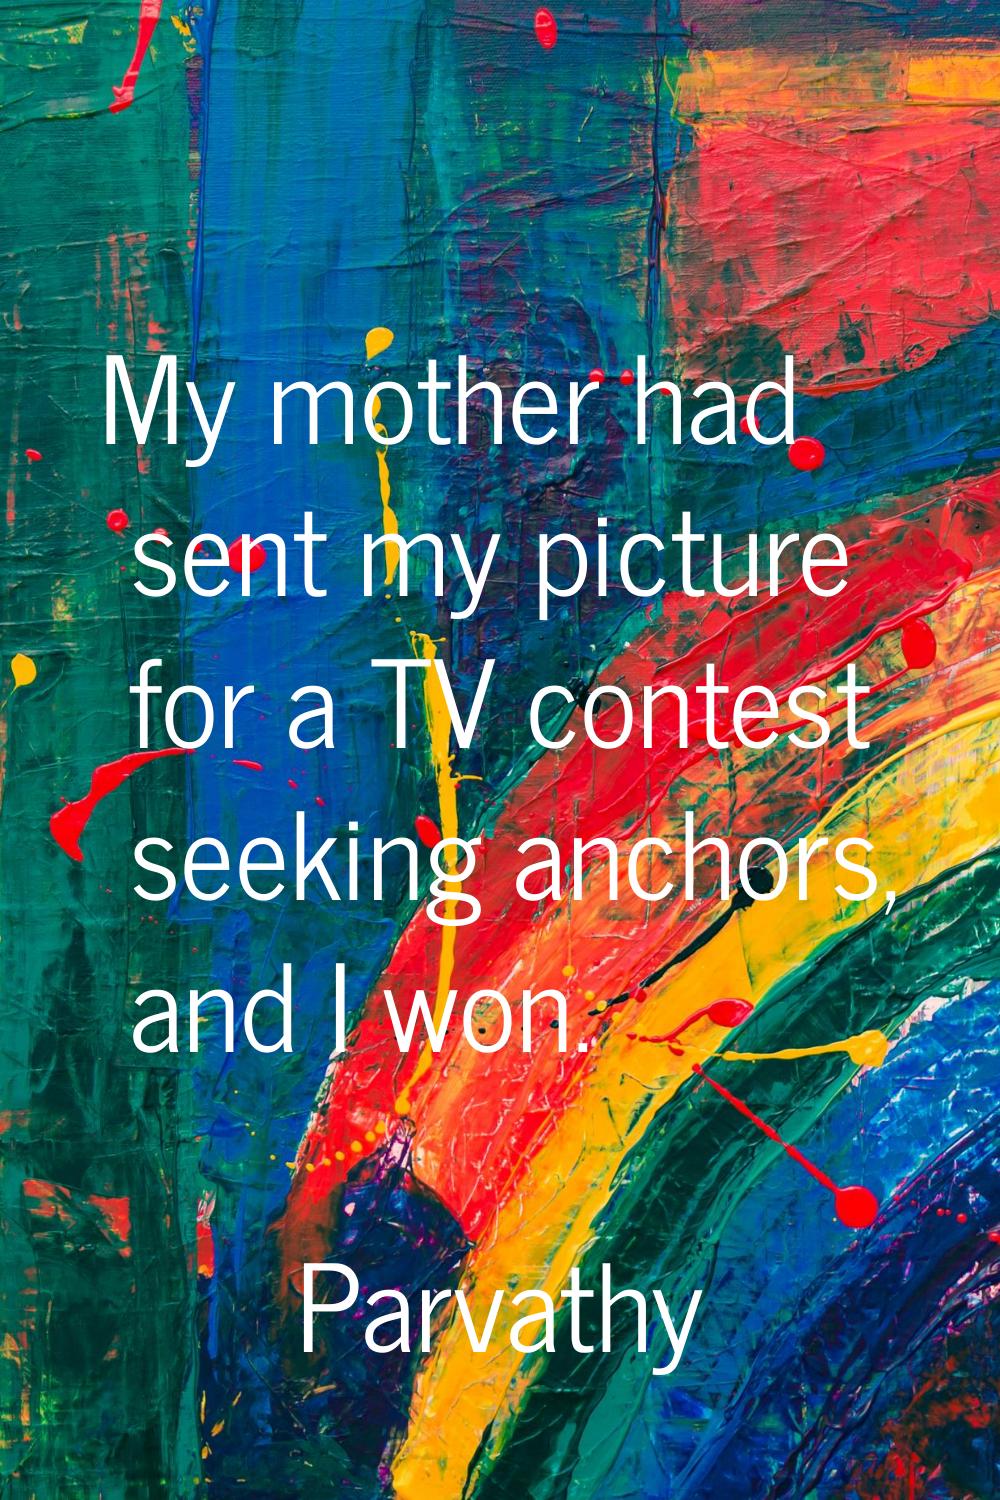 My mother had sent my picture for a TV contest seeking anchors, and I won.